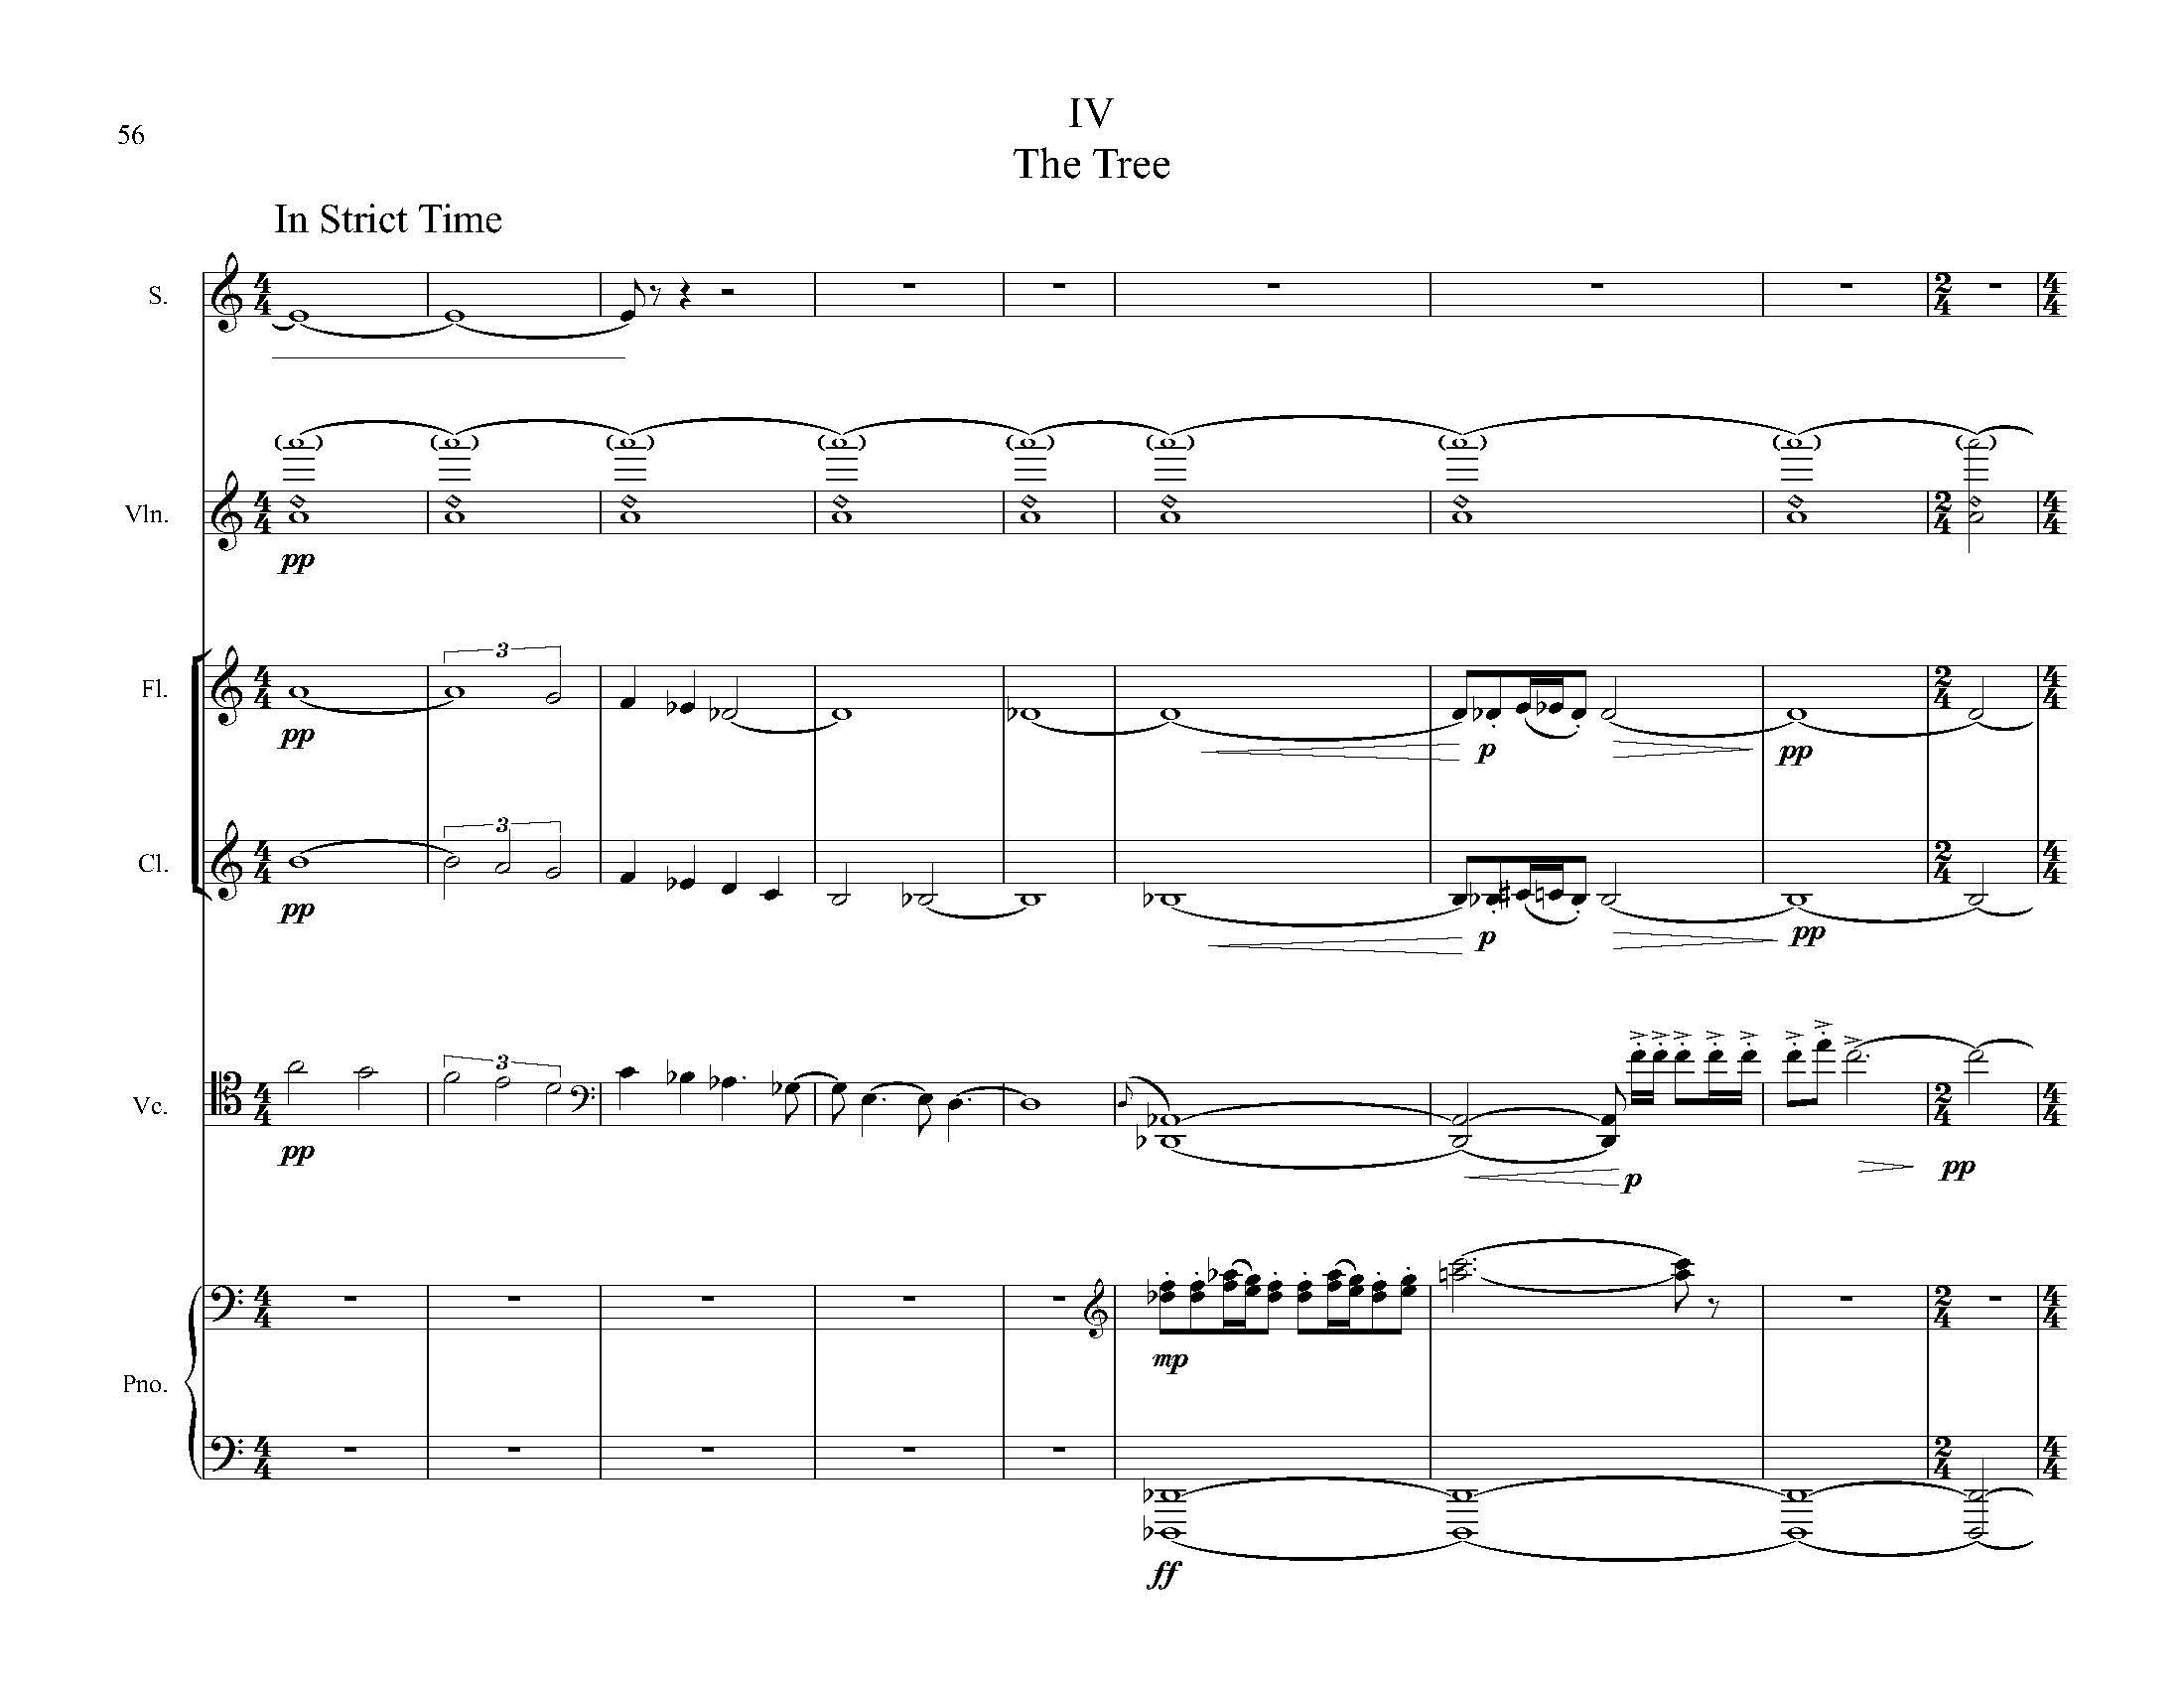 The Hill Wife - Complete Score_Page_064.jpg